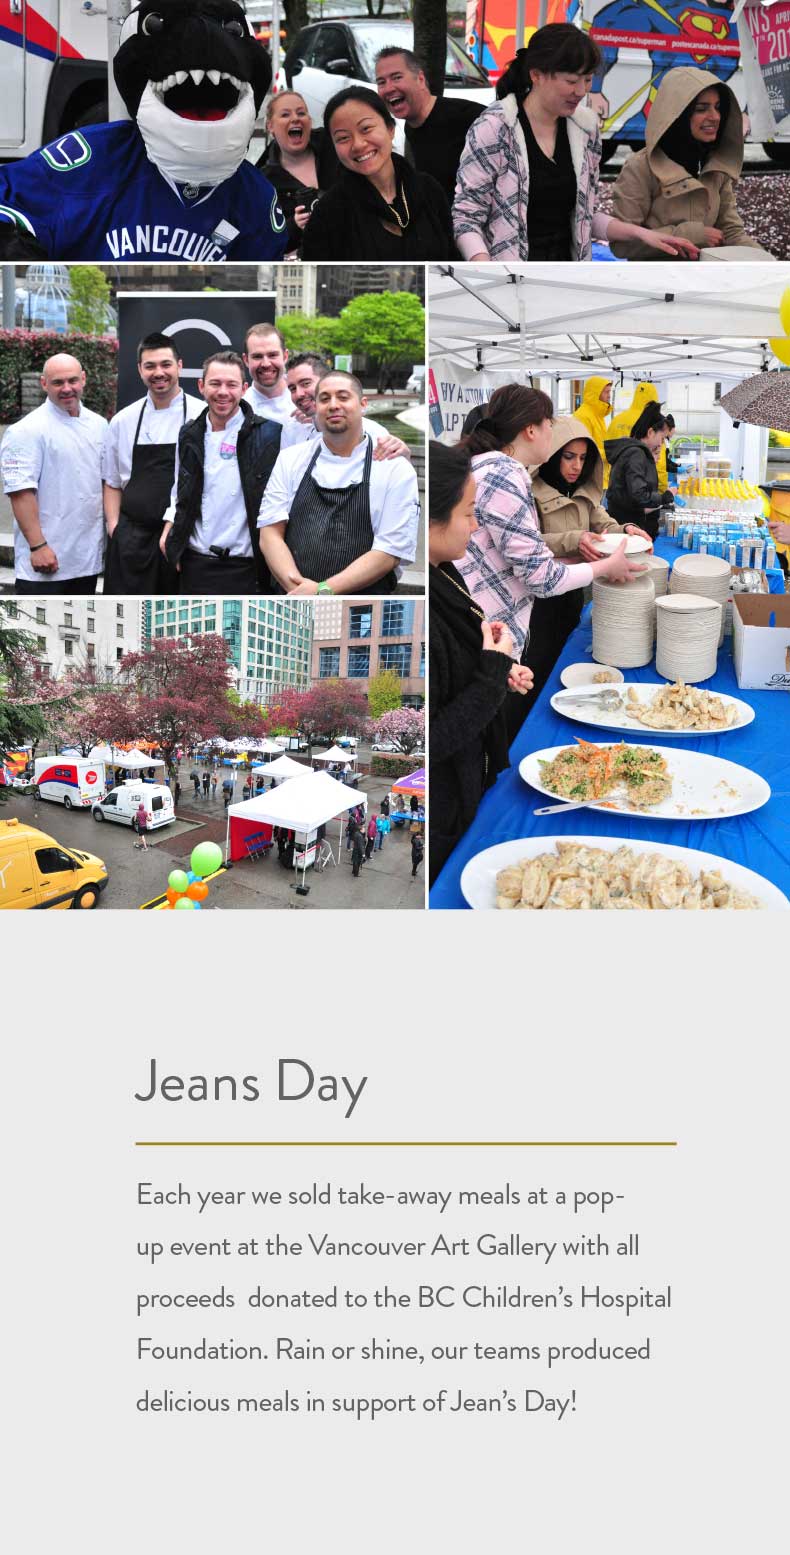 Each year we sold take-away meals at a pop-up event at the Vancouver Art Gallery with all proceeds  donated to the BC Children’s Hospital Foundation. Rain or shine, our teams produced delicious meals in support of Jean’s Day! 